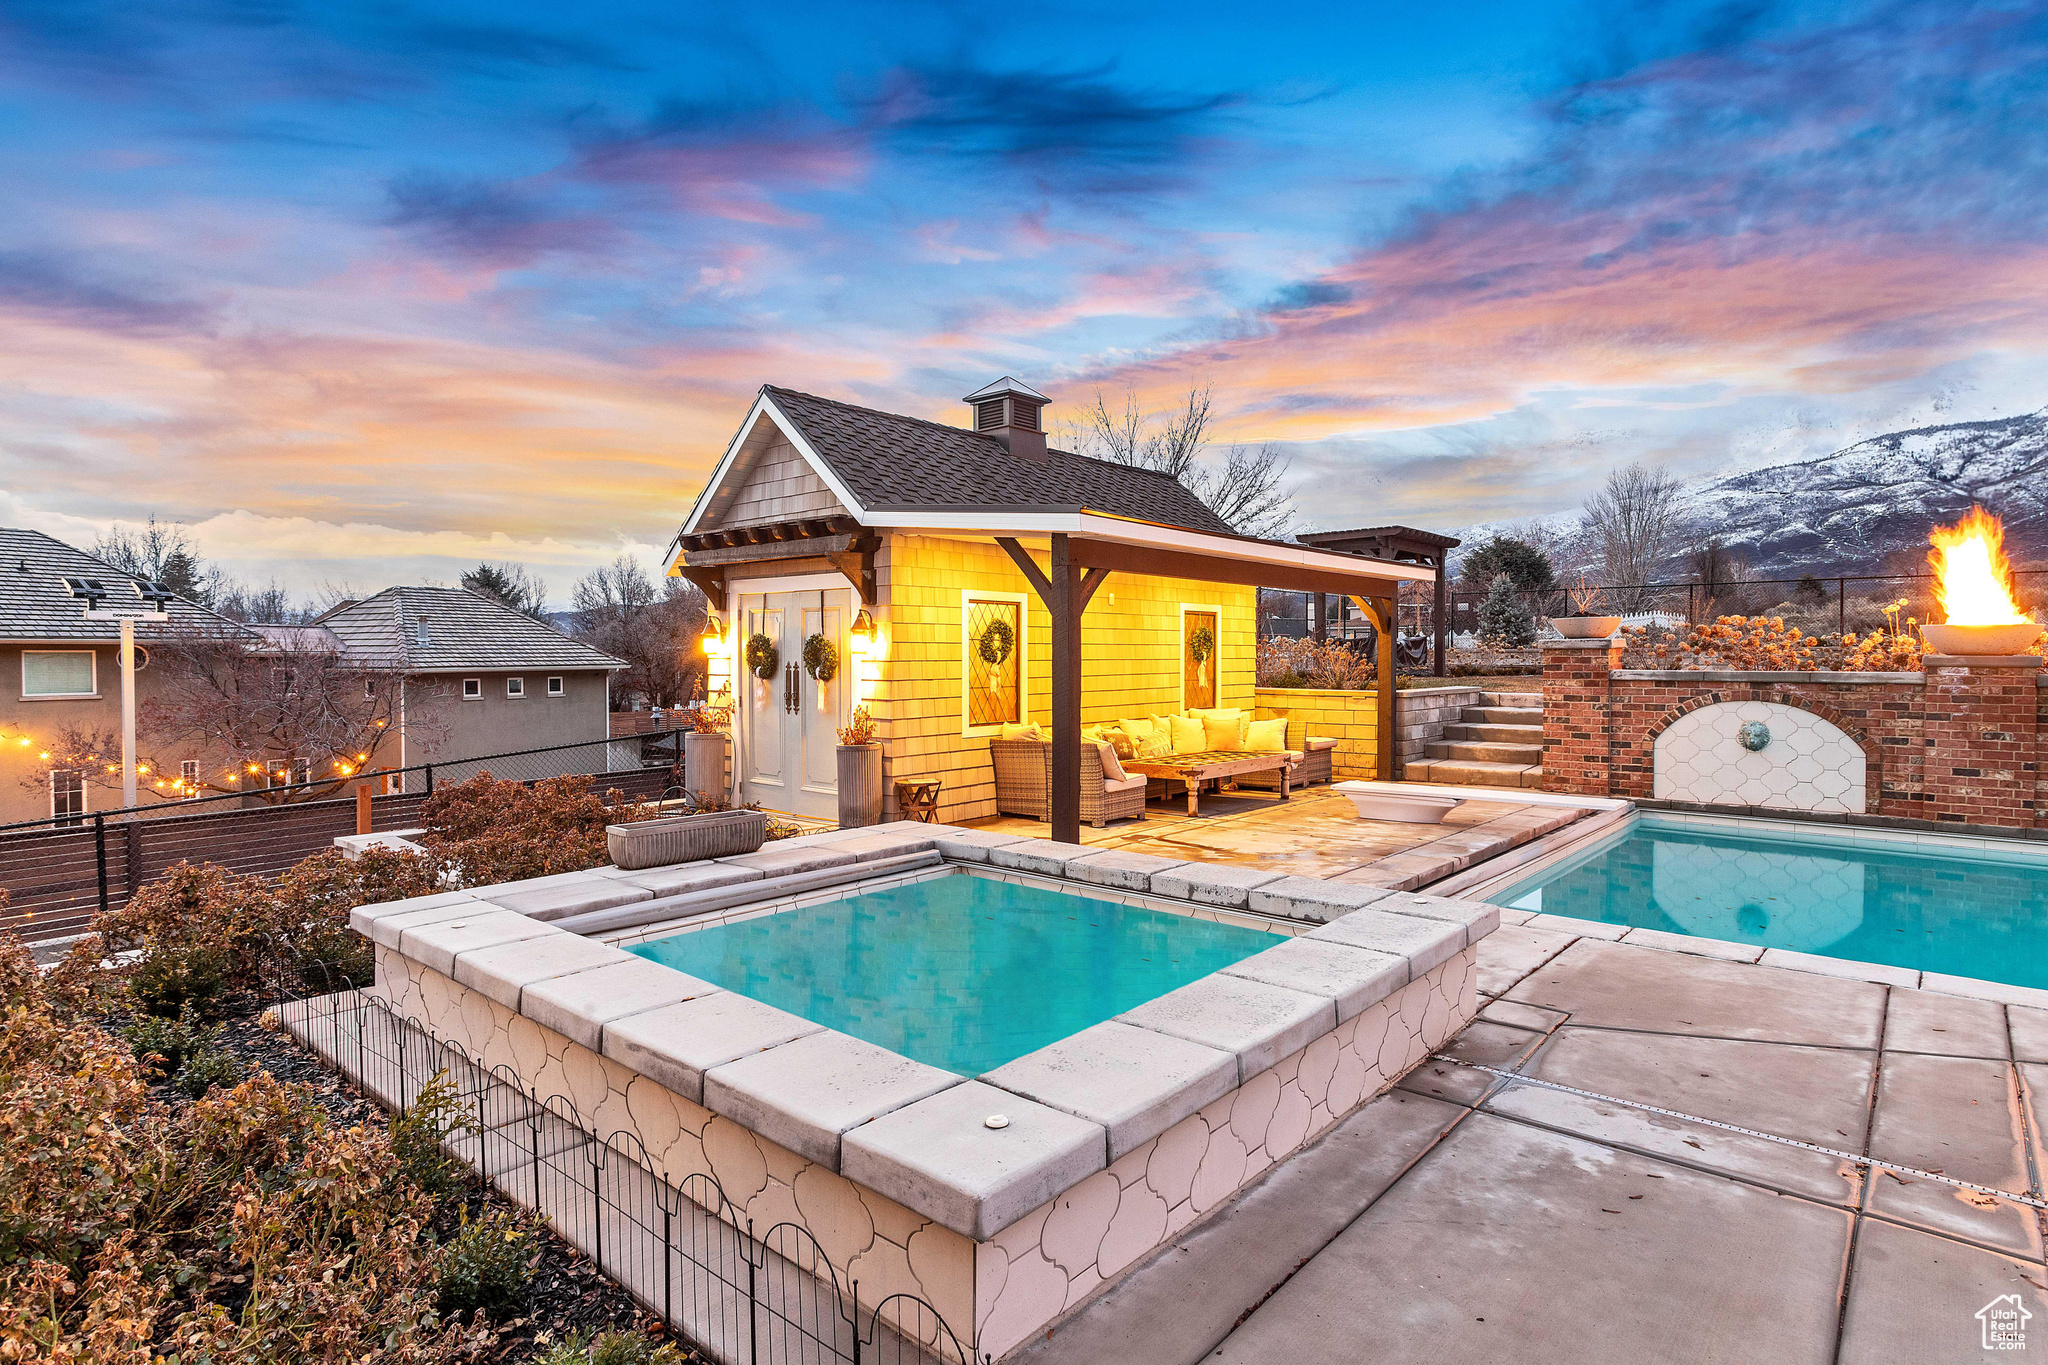 Pool at dusk with an outdoor living space and a patio area